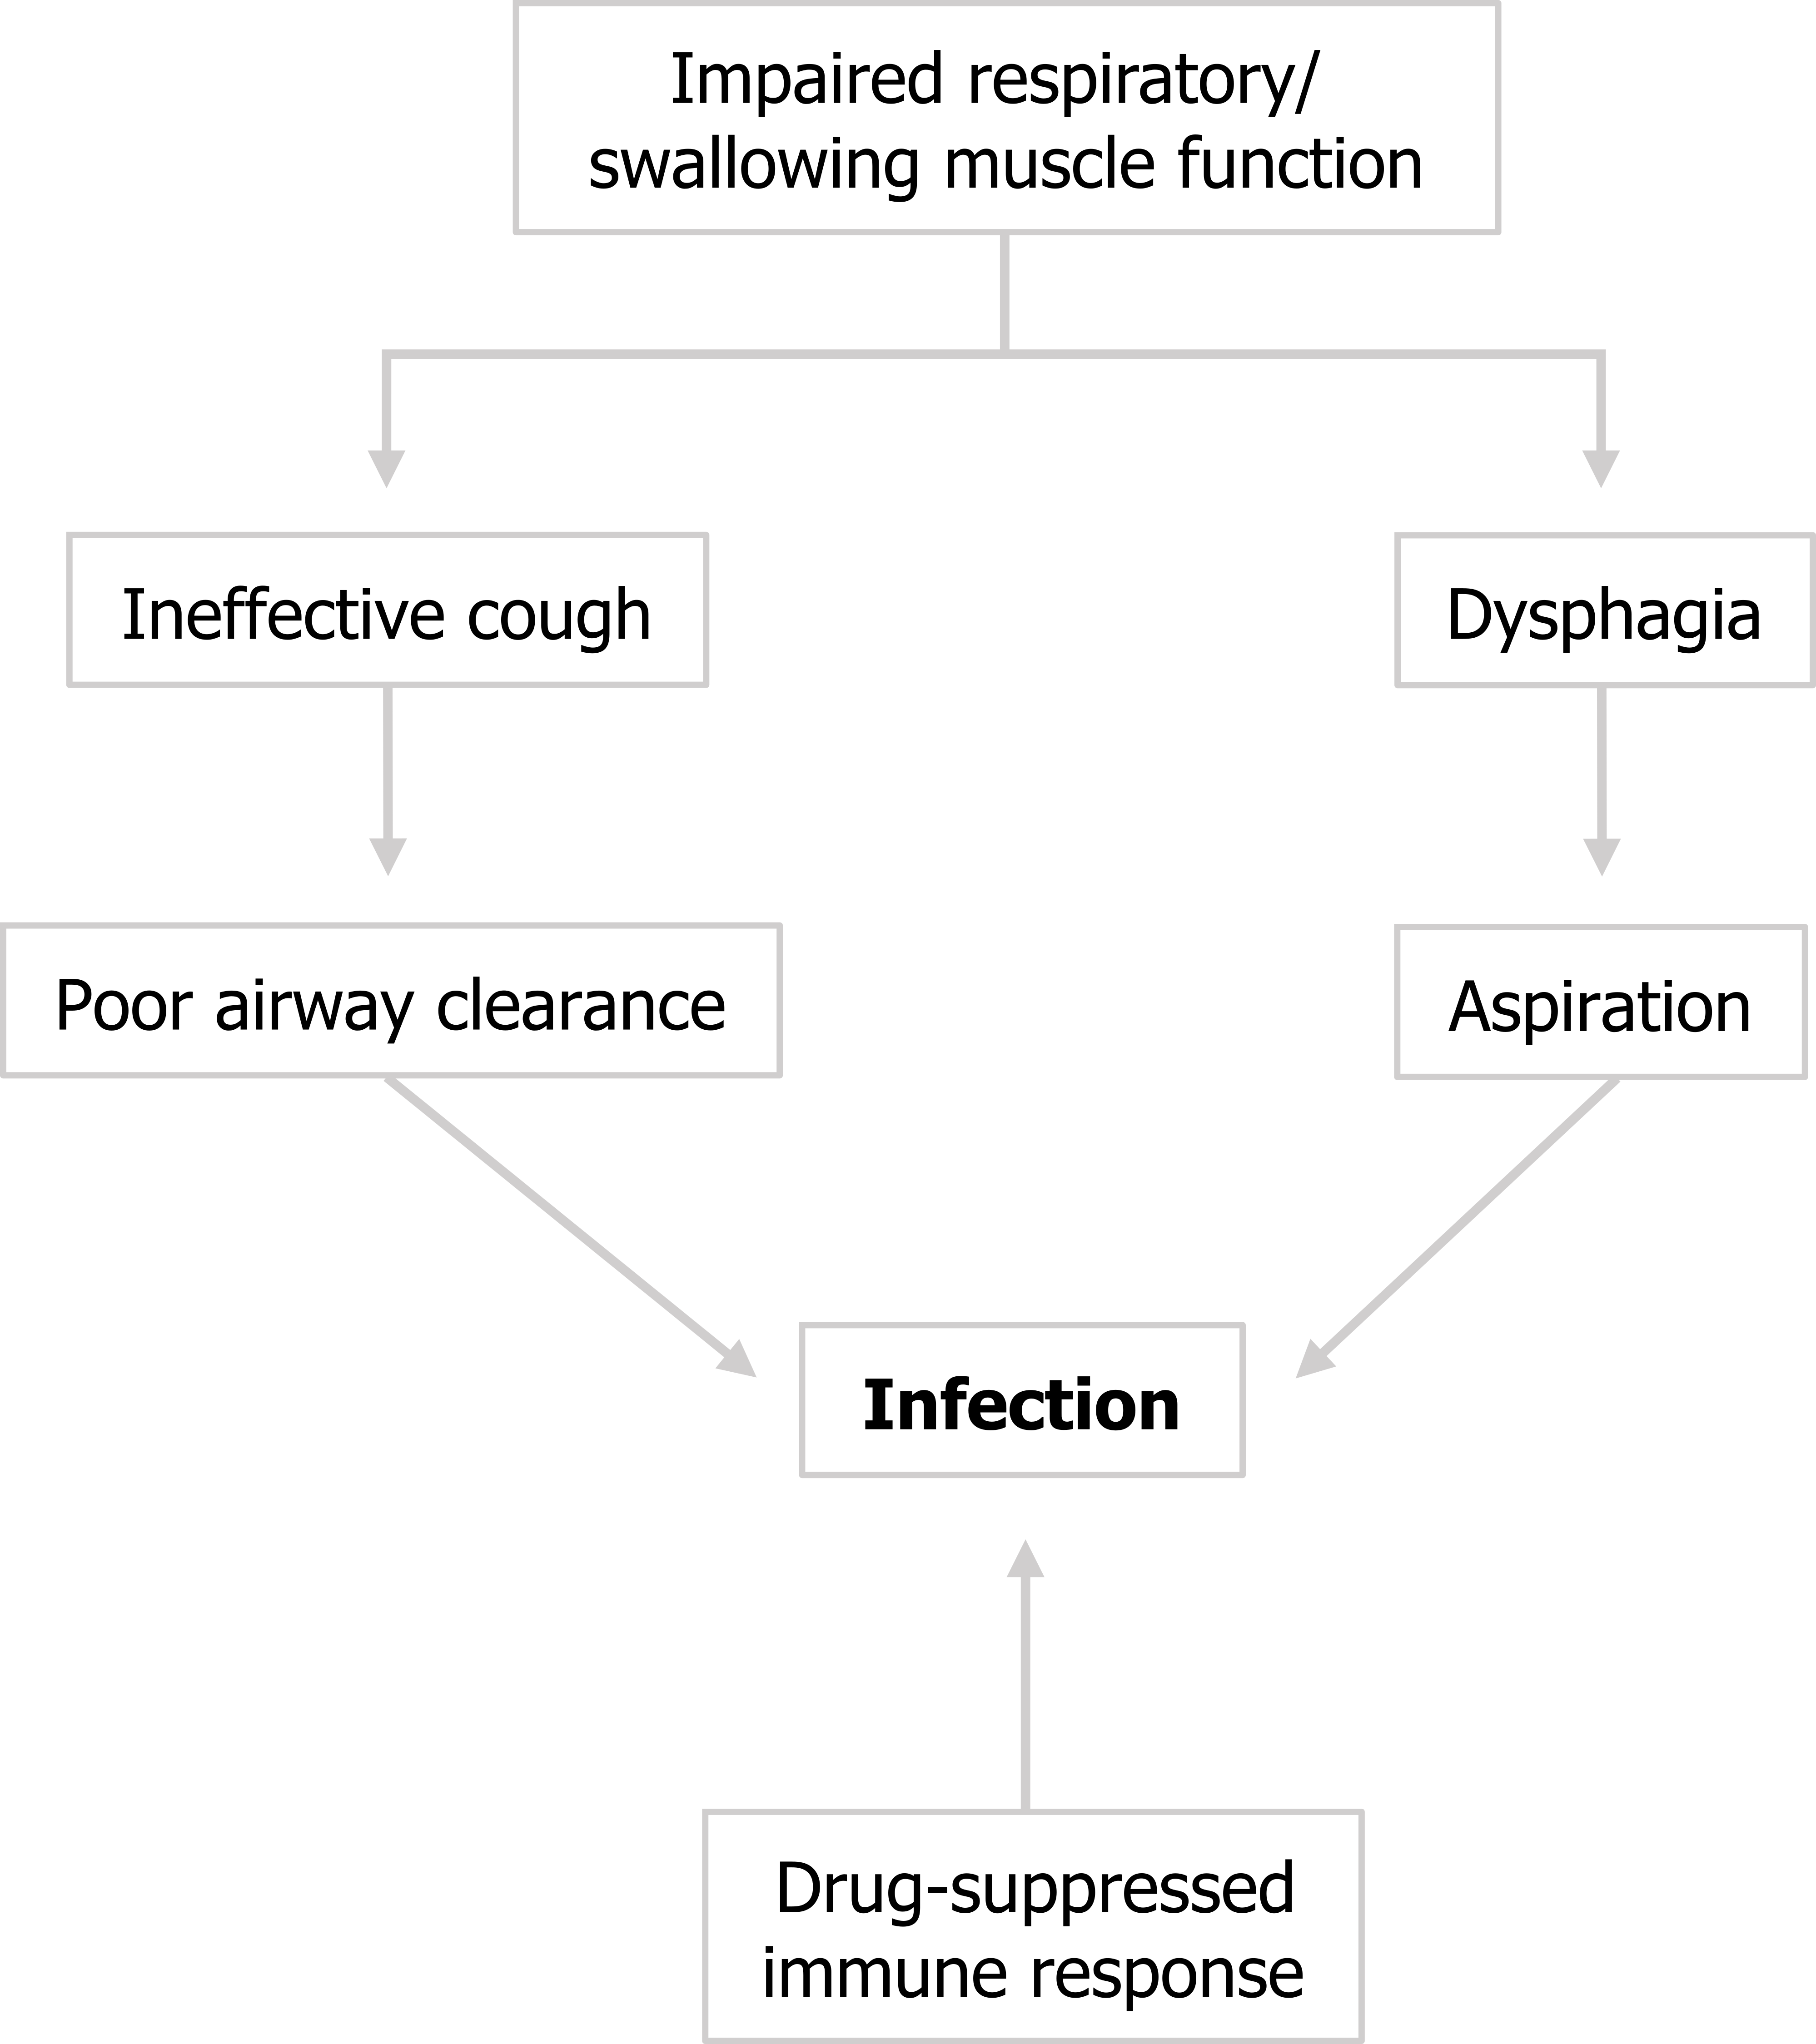 Impaired respiratory / swallowing muscle function arrow to ineffective cough arrow to poor airway clearance arrow to infection. Impaired respiratory / swallowing muscle function arrow to dysphagia arrow to aspiration arrow to infection. Drug suppressed immune response arrow to infection